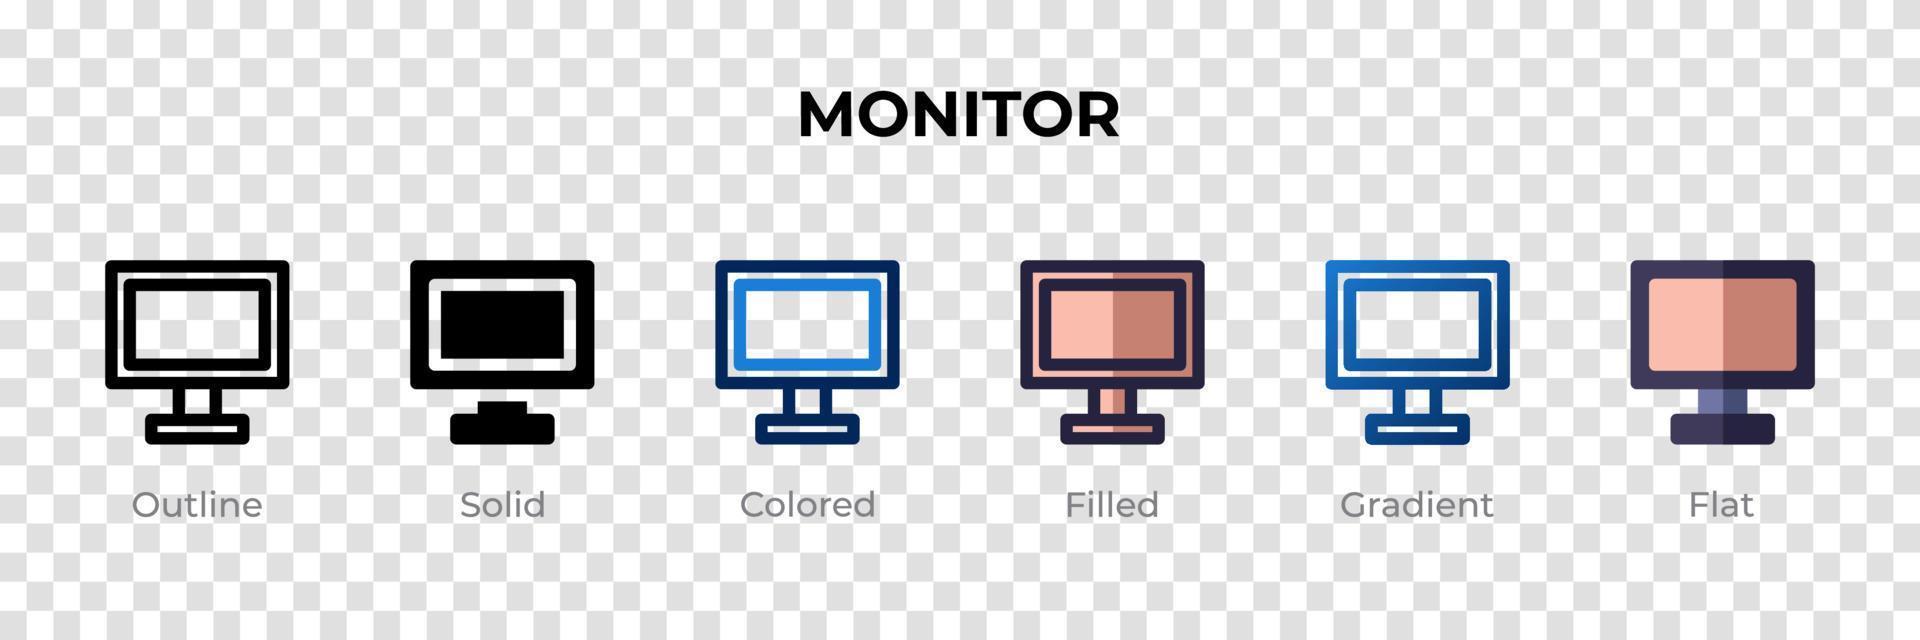 Monitor icon in different style. Monitor vector icons designed in outline, solid, colored, filled, gradient, and flat style. Symbol, logo illustration. Vector illustration